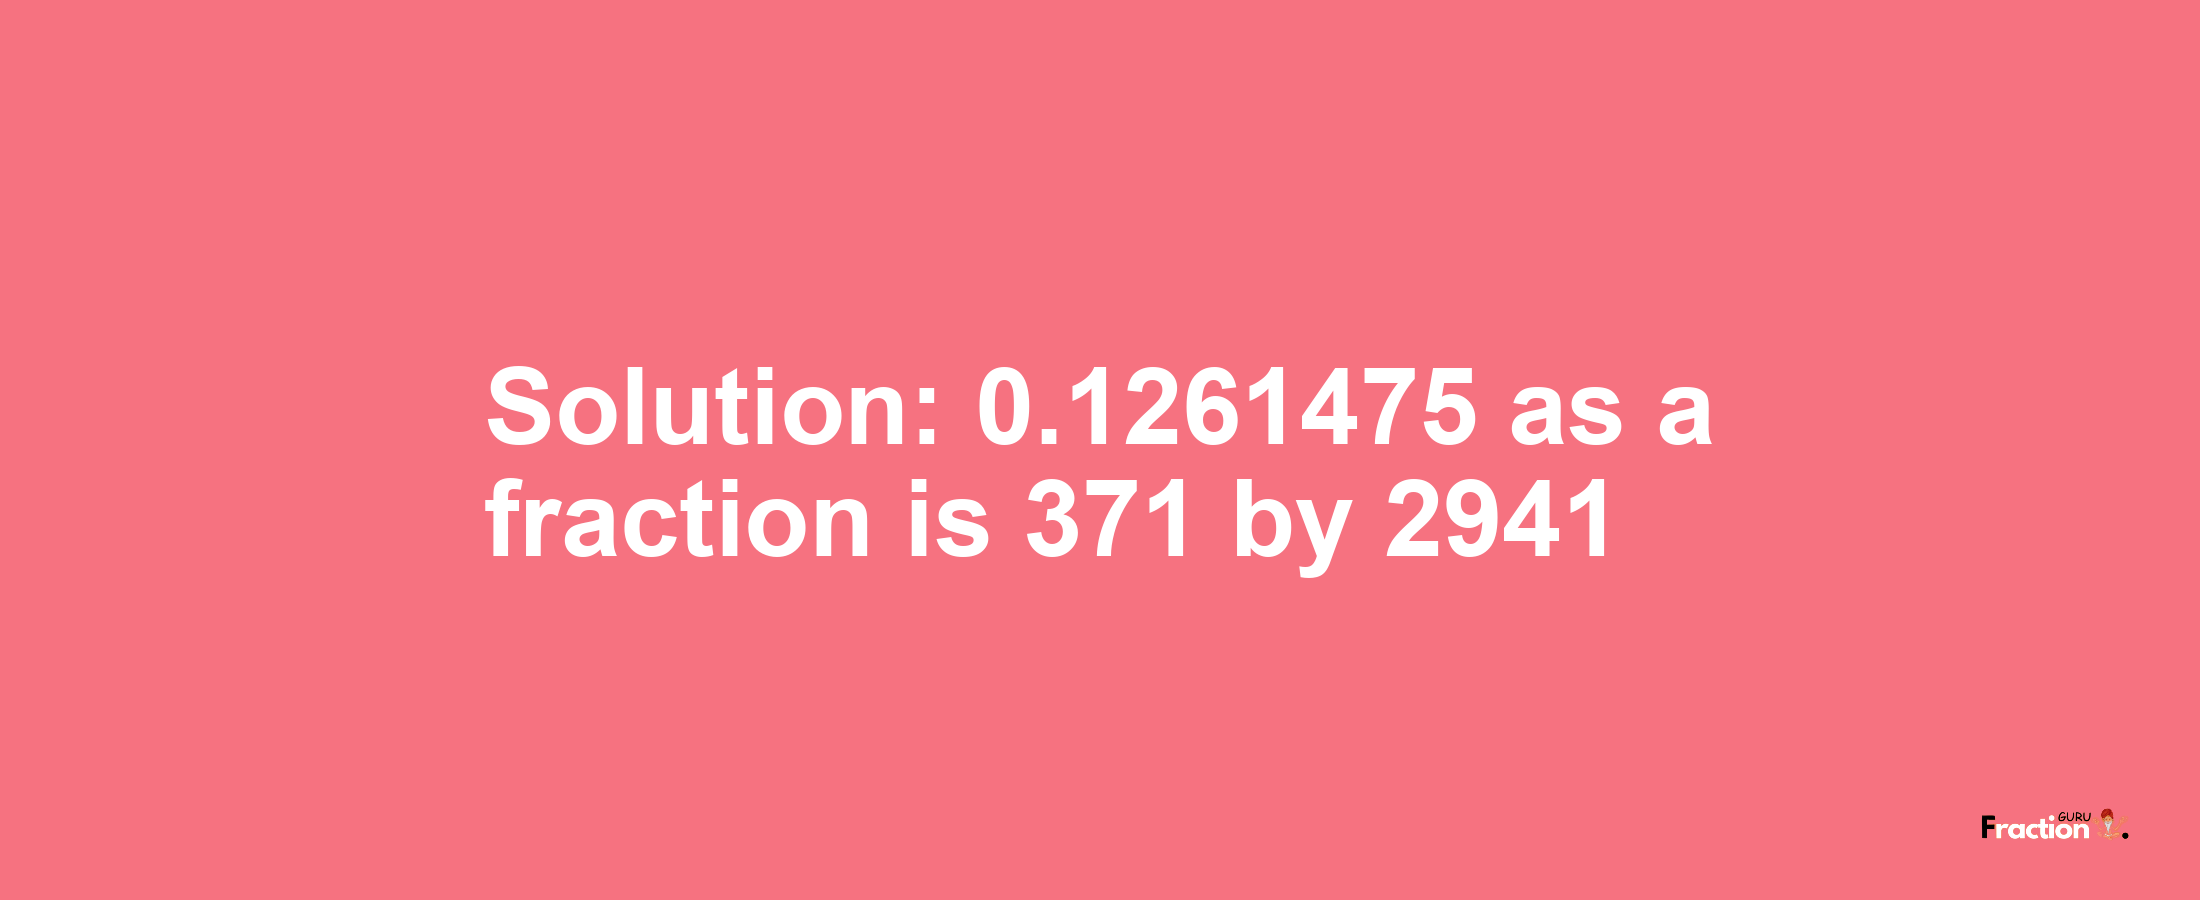 Solution:0.1261475 as a fraction is 371/2941